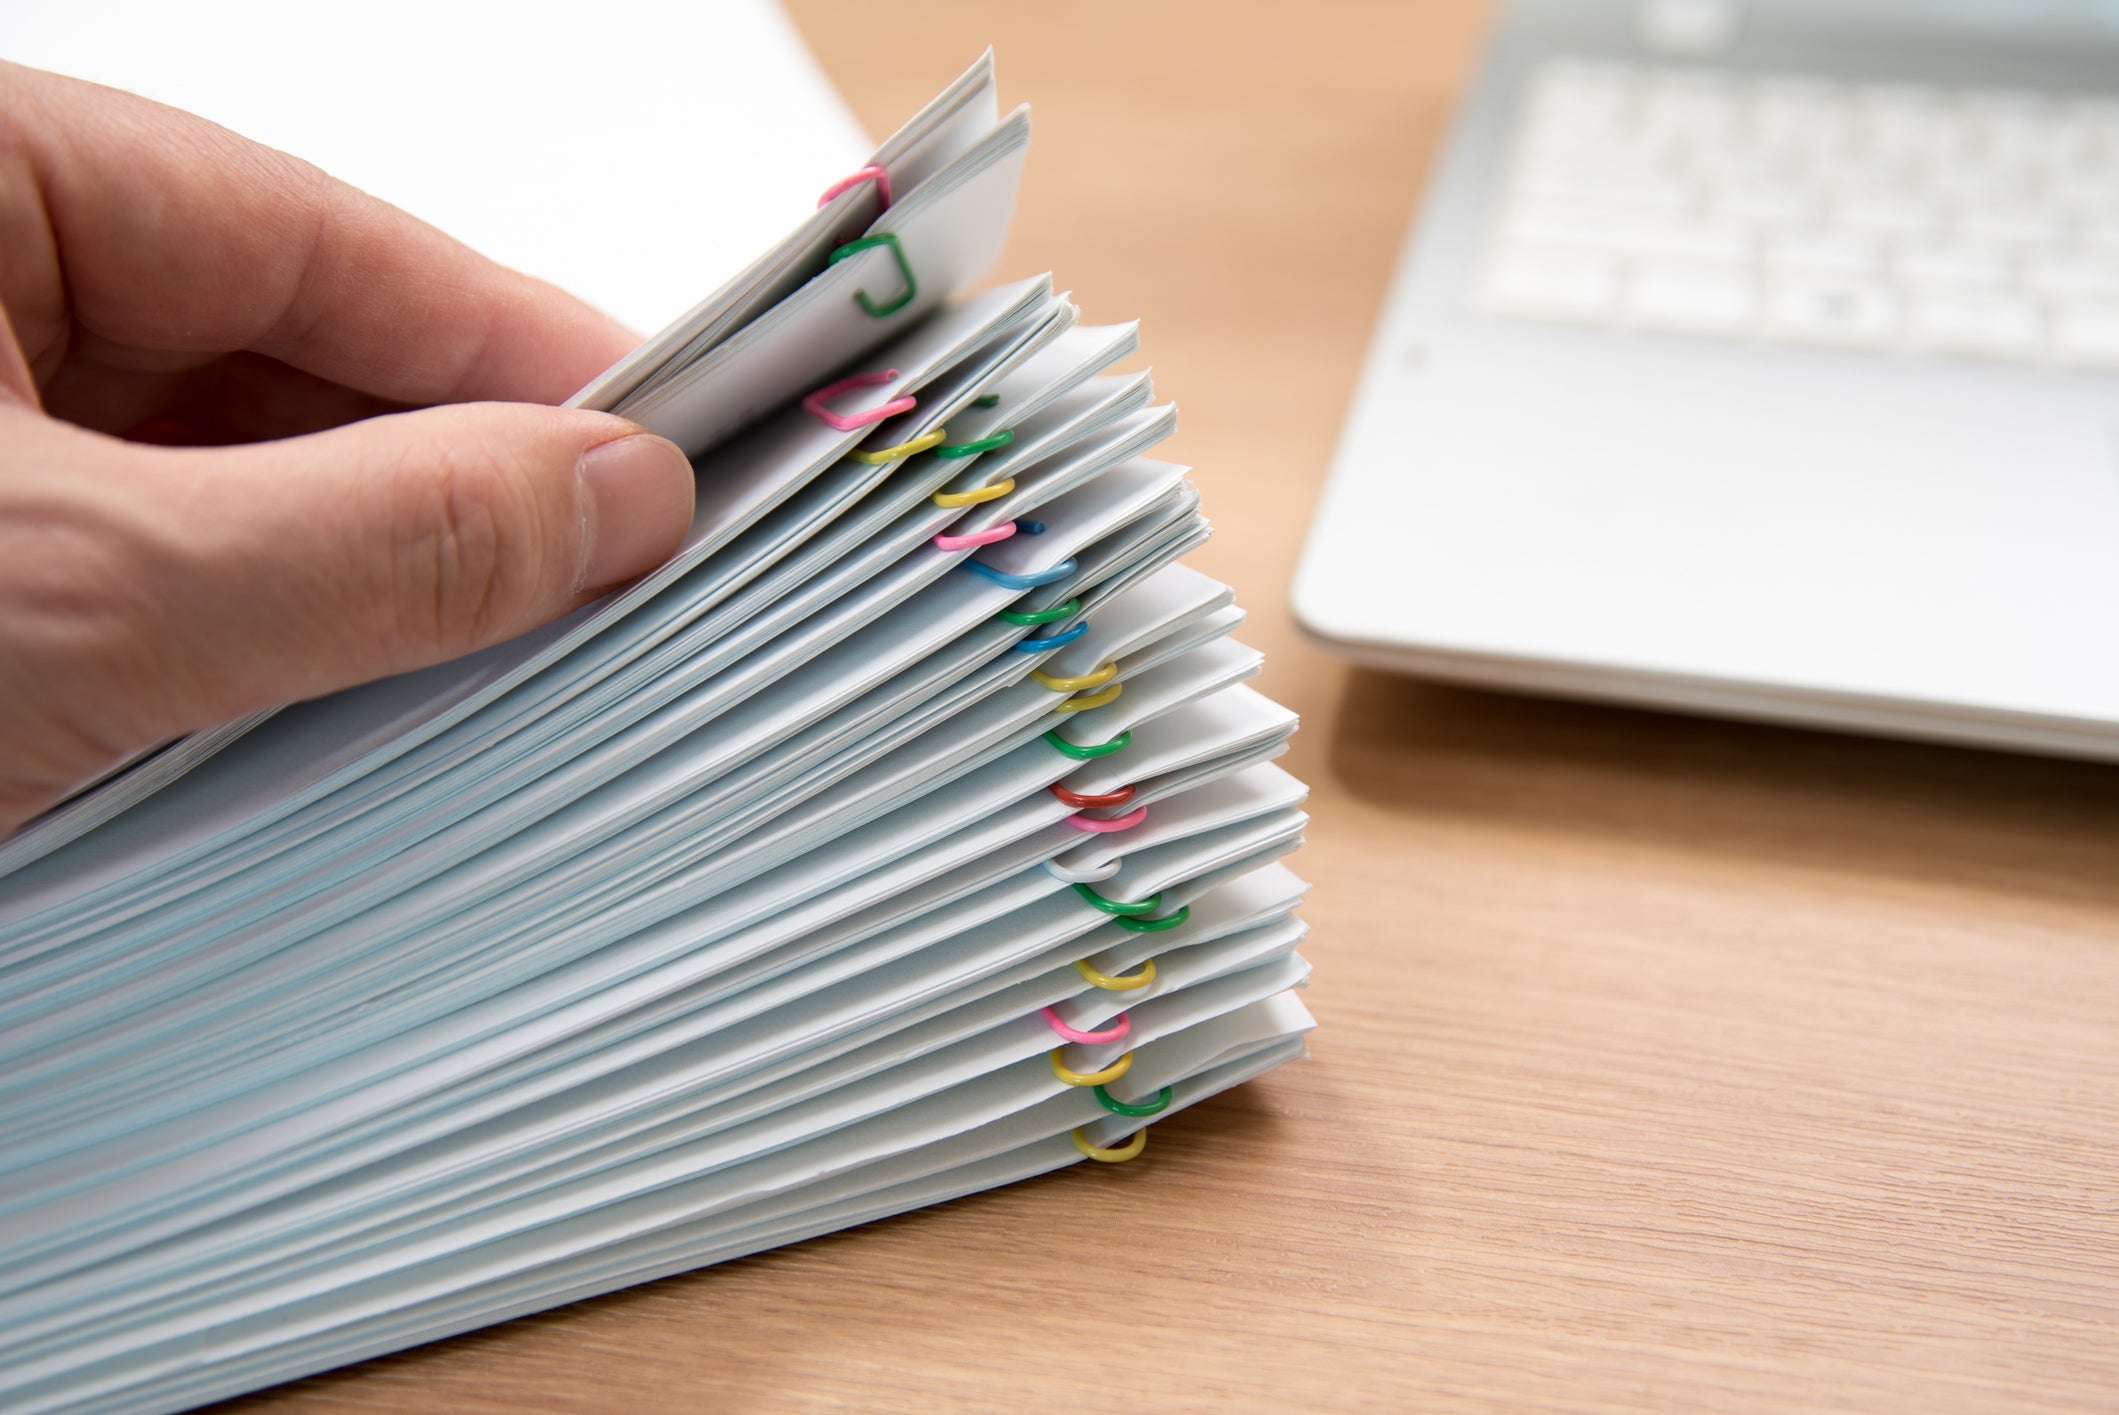 A person thumbs through several bundles of papers held together with paper clips.